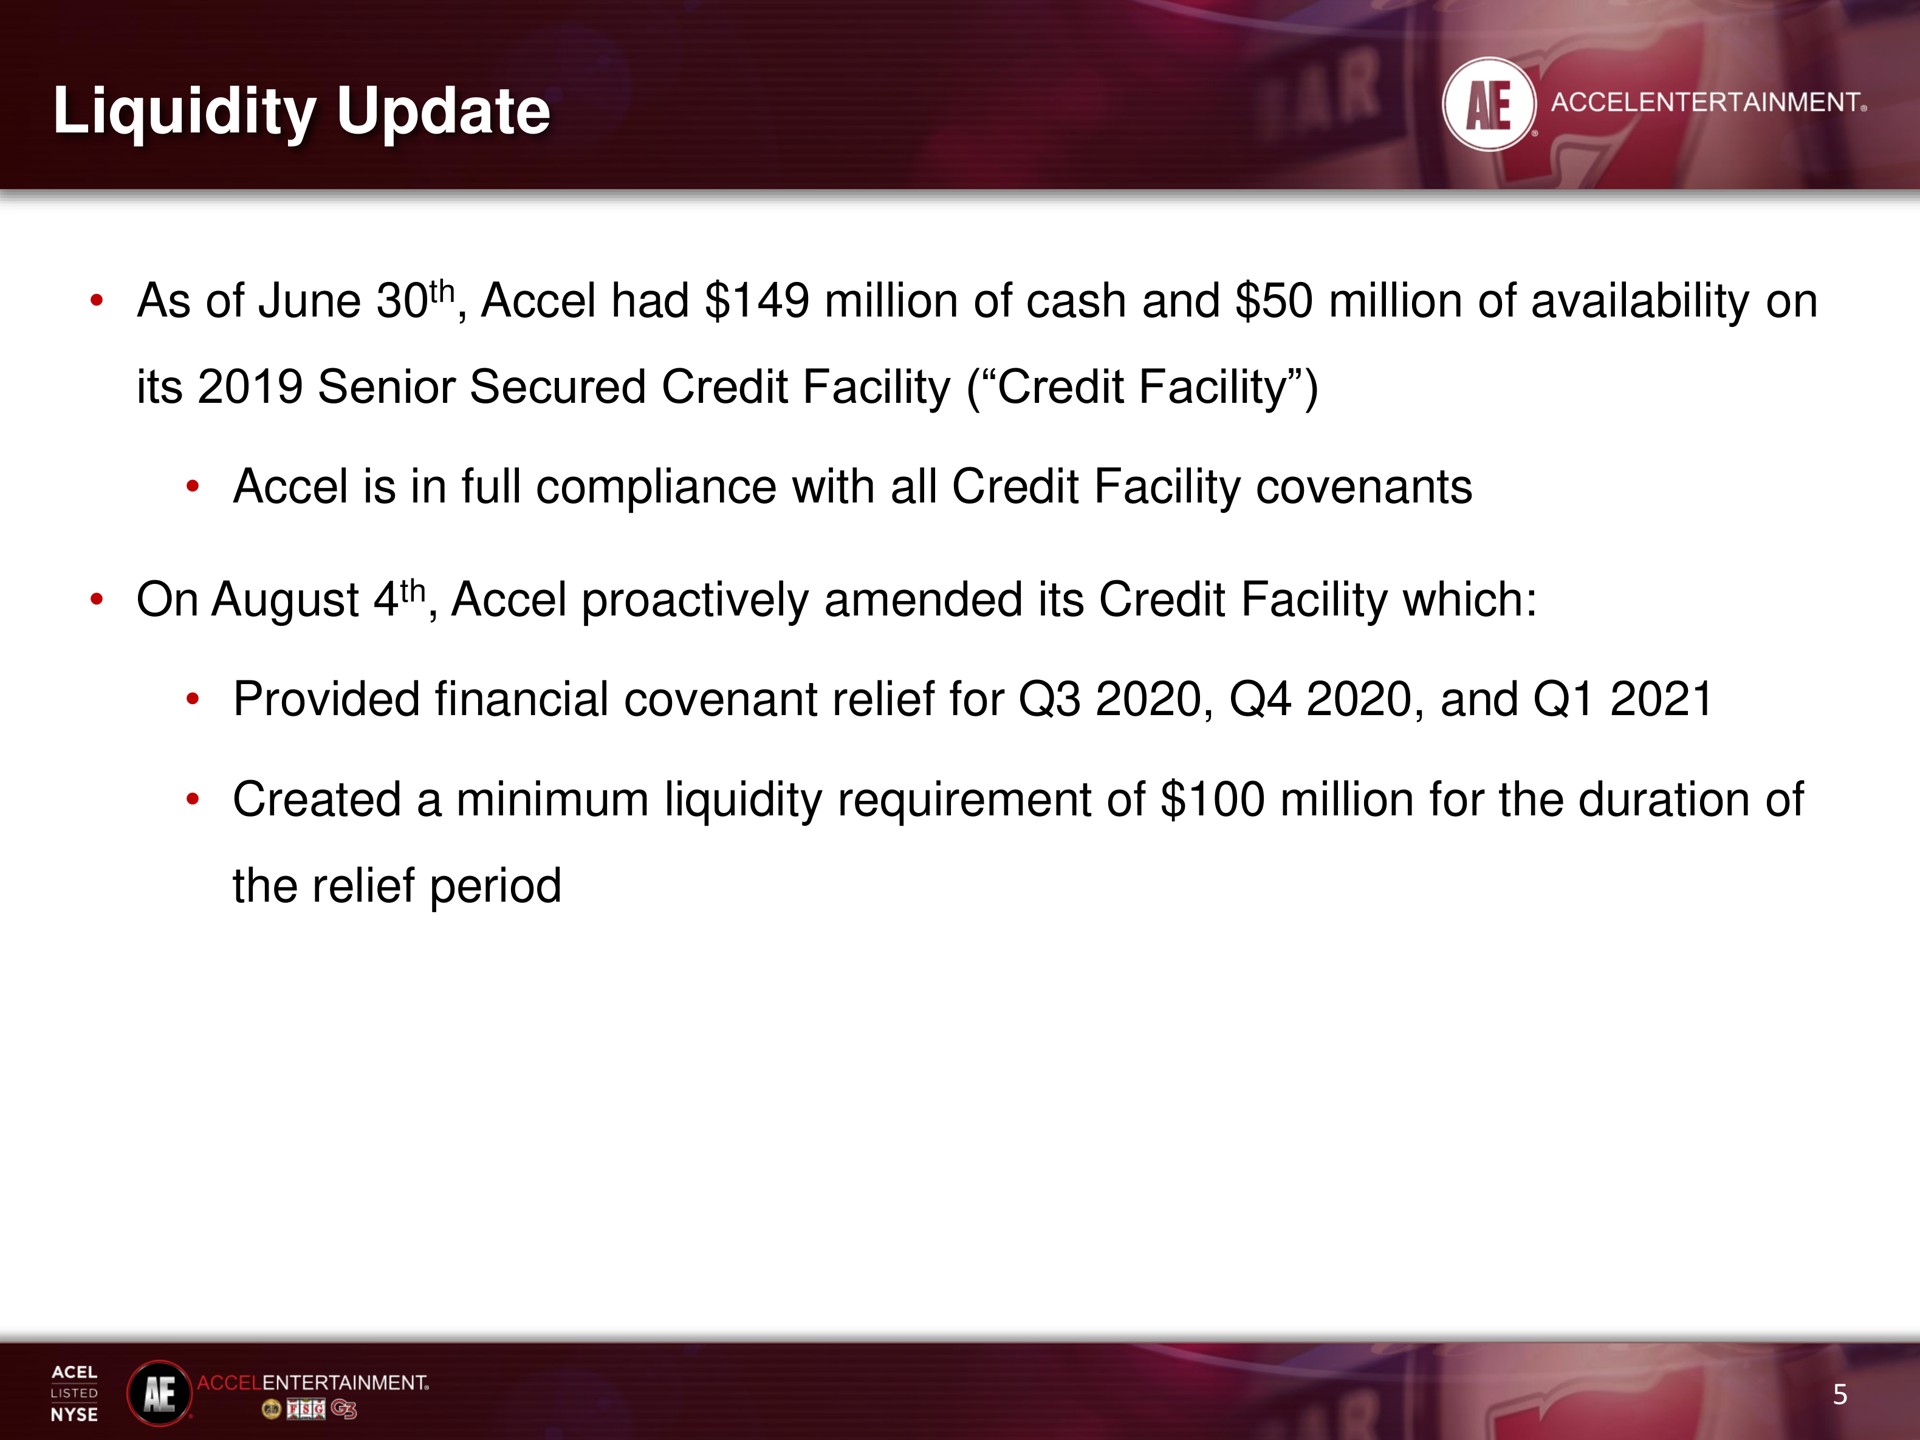 liquidity update as of june had million of cash and million of availability on its senior secured credit facility credit facility is in full compliance with all credit facility covenants on august amended its credit facility which provided financial covenant relief for and created a minimum liquidity requirement of million for the duration of the relief period | Accel Entertaiment